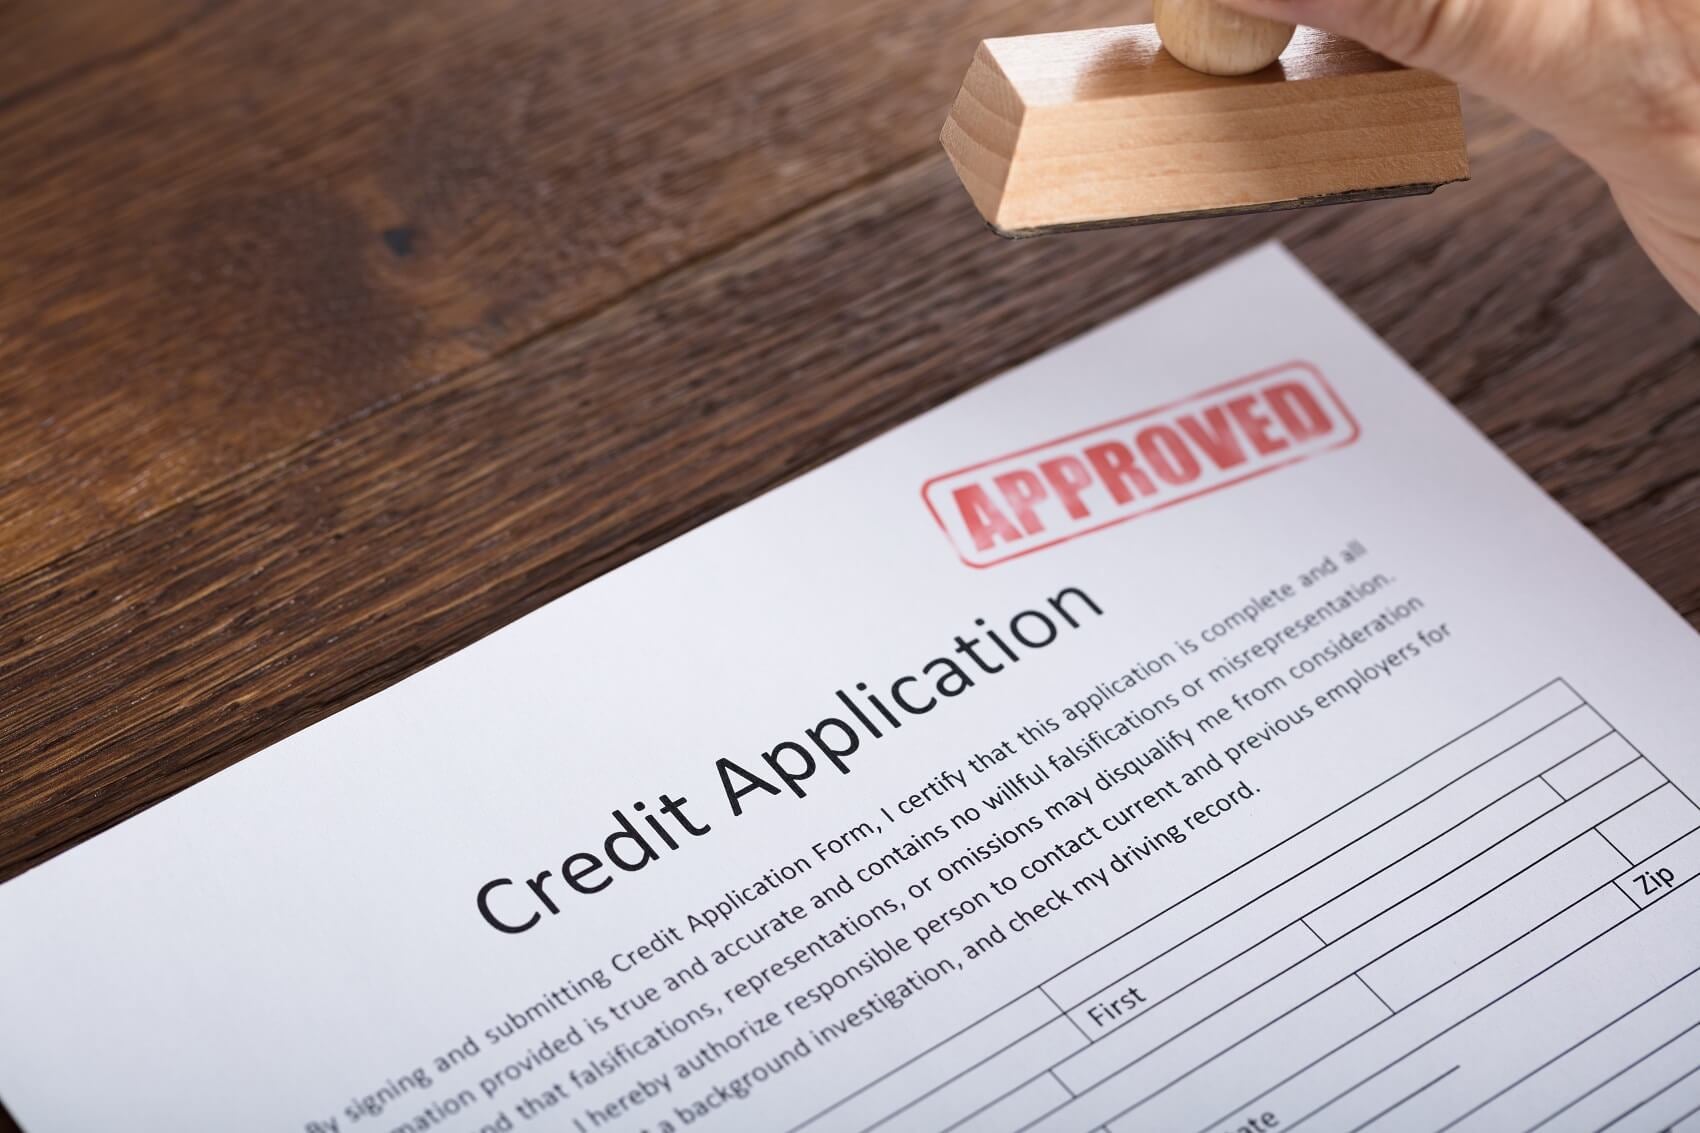 The Issue of Credit